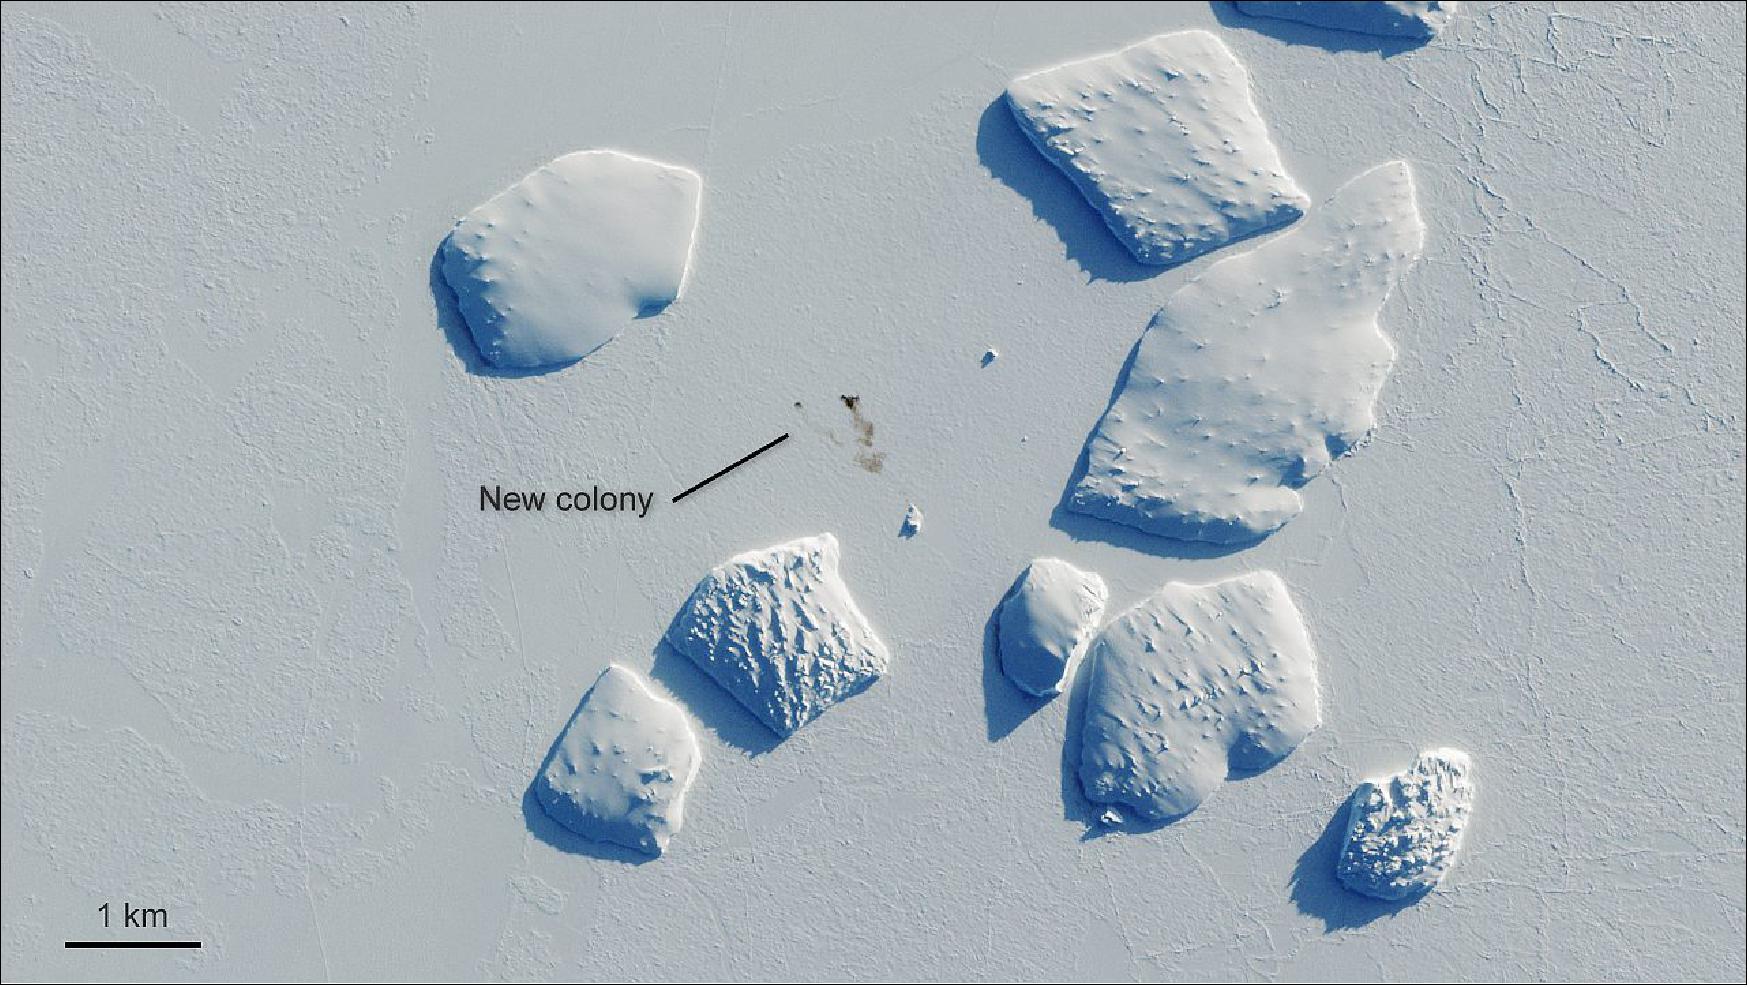 Figure 21: A penguin colony near Ninnis Bank was spotted by the Copernicus Sentinel-2 mission on 26 August 2019. Although penguins are too small to show up in satellite images, giant stains on the ice from penguin droppings – known as guano – are easy to identify. These brownish patches have allowed scientists to locate and track penguin populations across the entire continent (image credit: ESA, the image contains modified Copernicus Sentinel data (2019), processed by ESA, CC BY-SA 3.0) IGO)